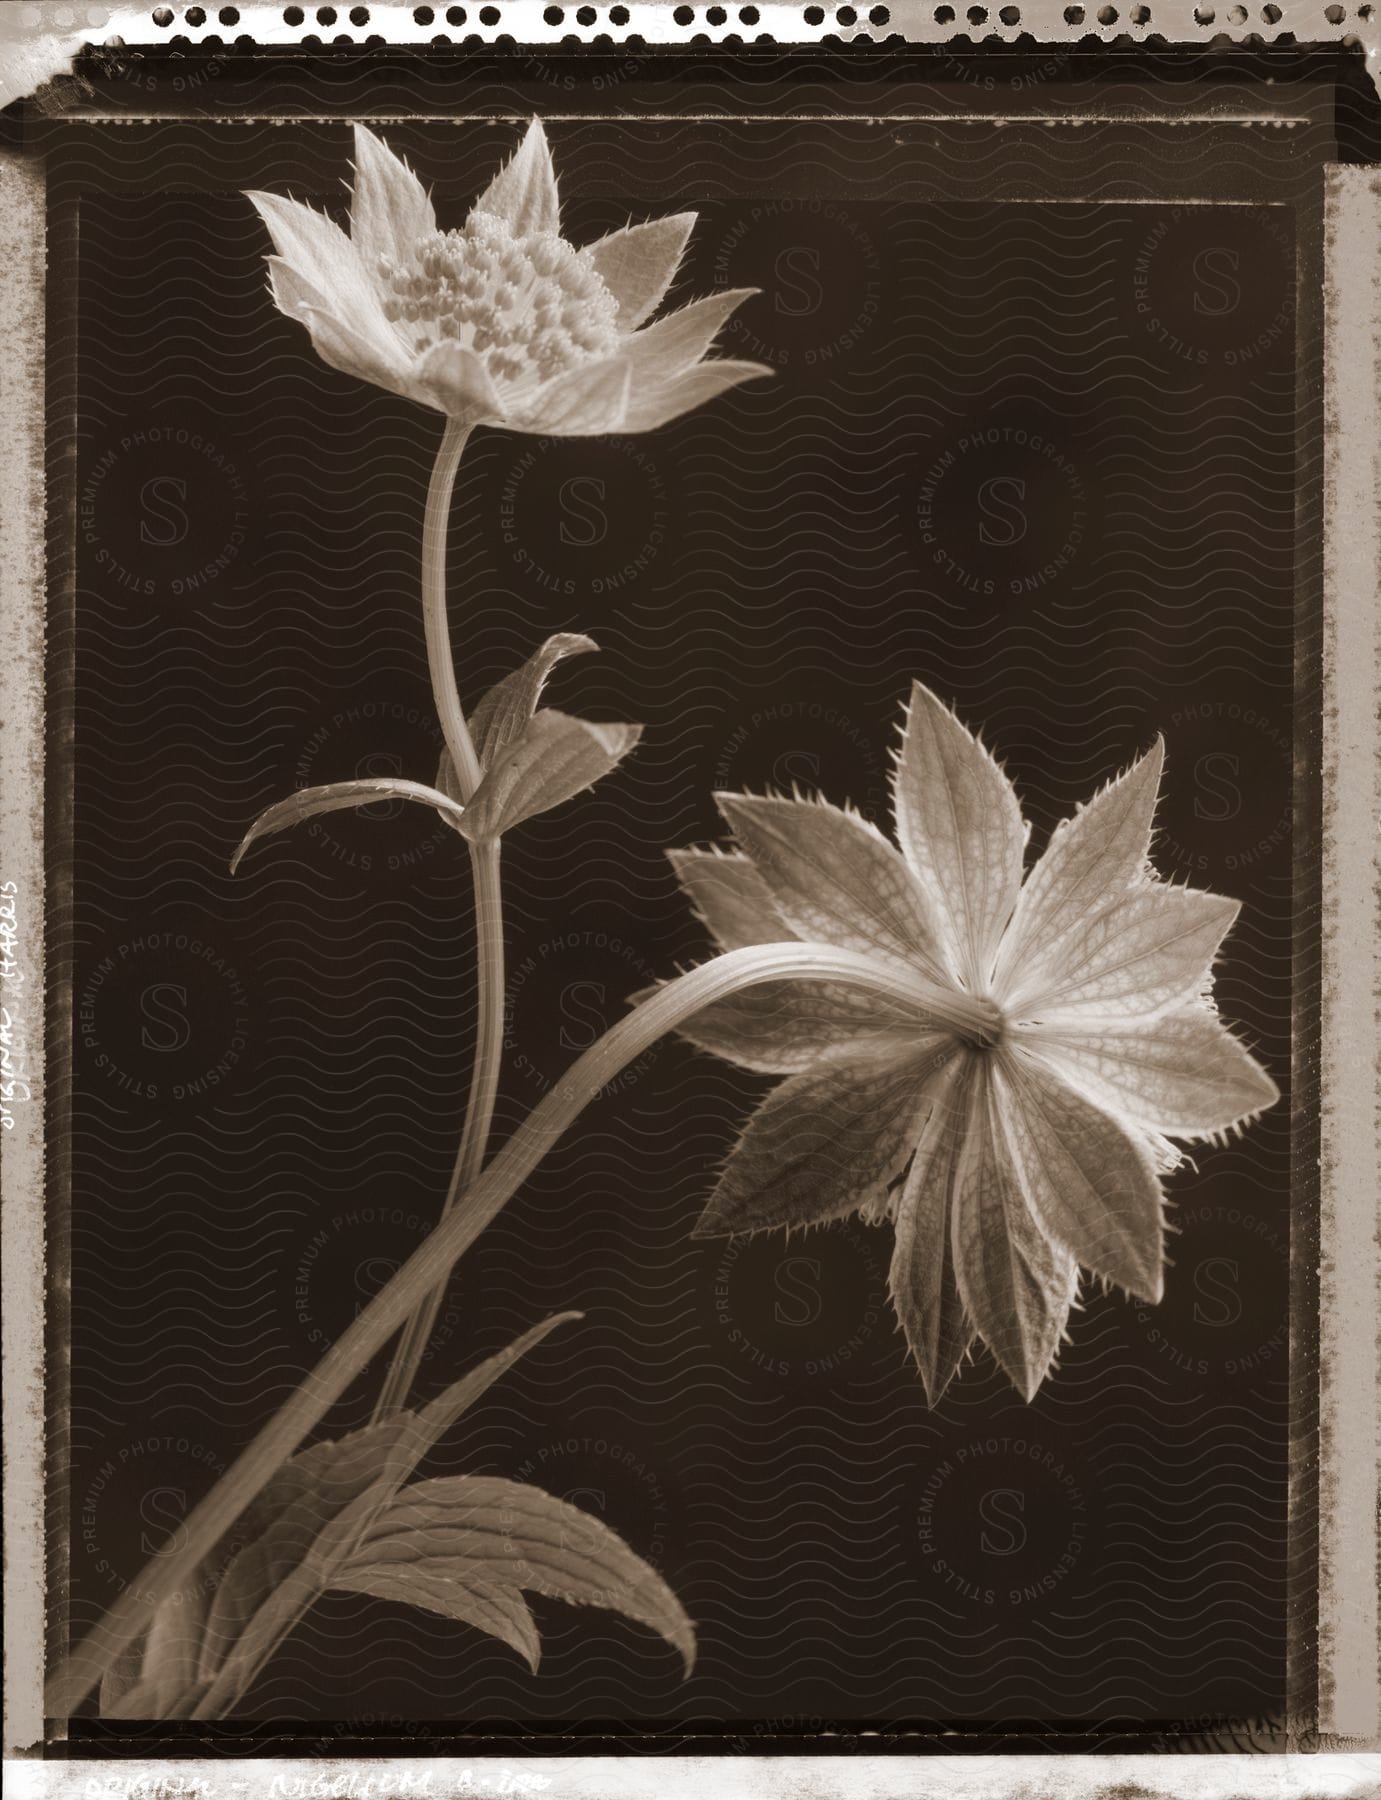 Two flowers captured in a studio setting